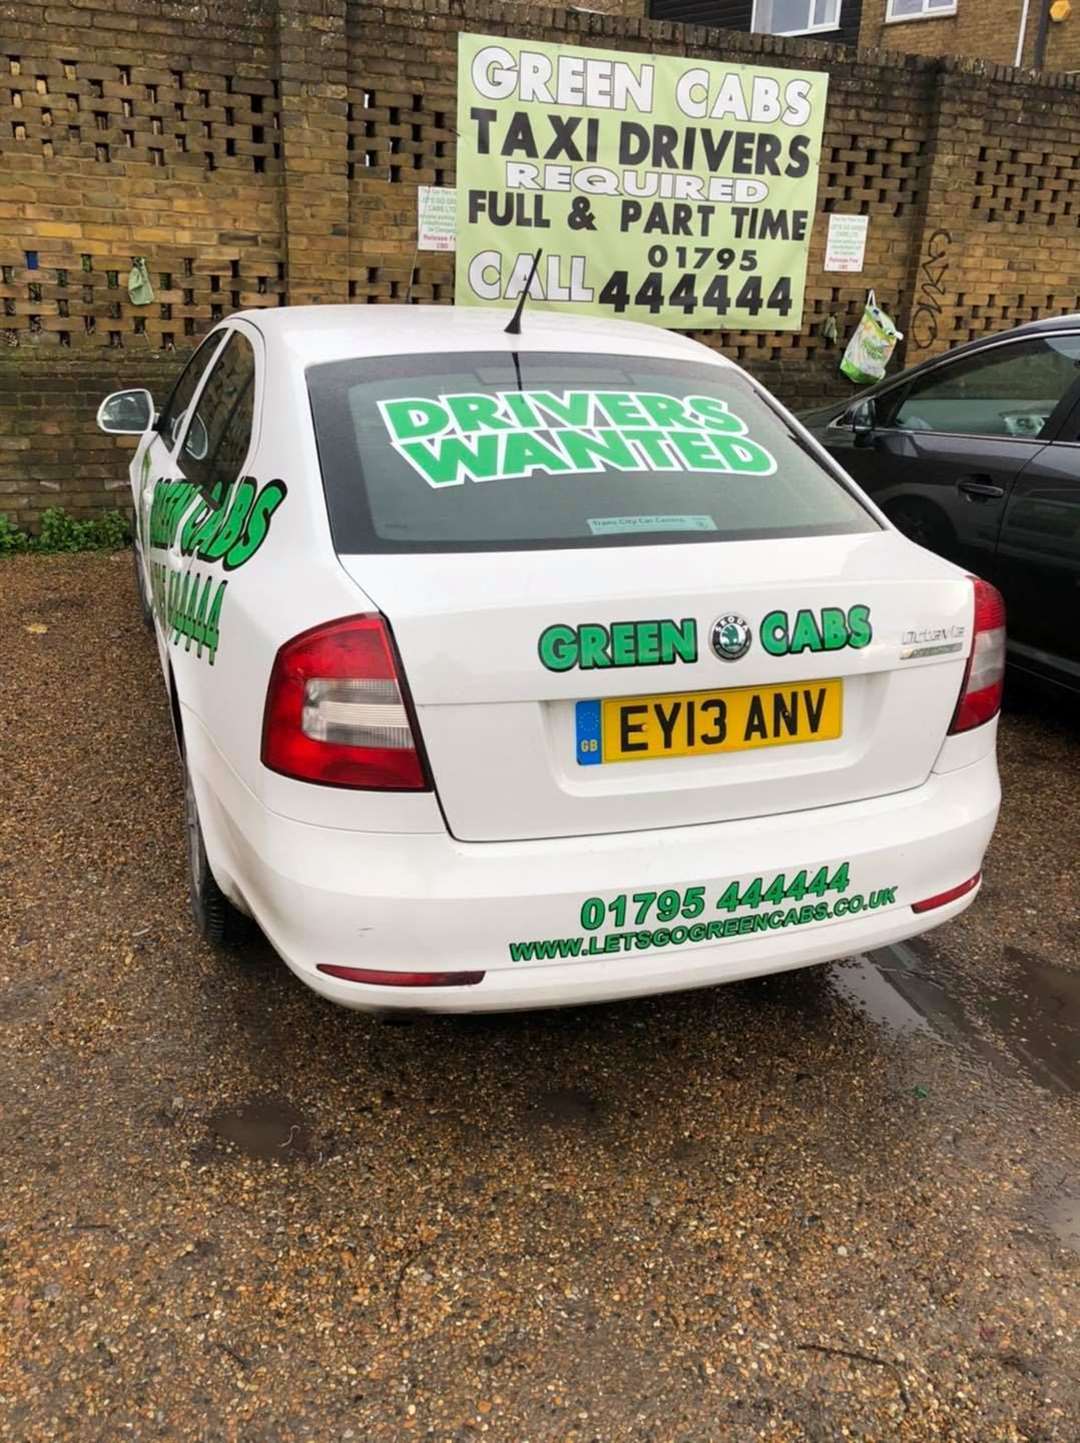 Let's Go Green Cabs in Sittingbourne has struggled after Covid-19 saw half its drivers leave